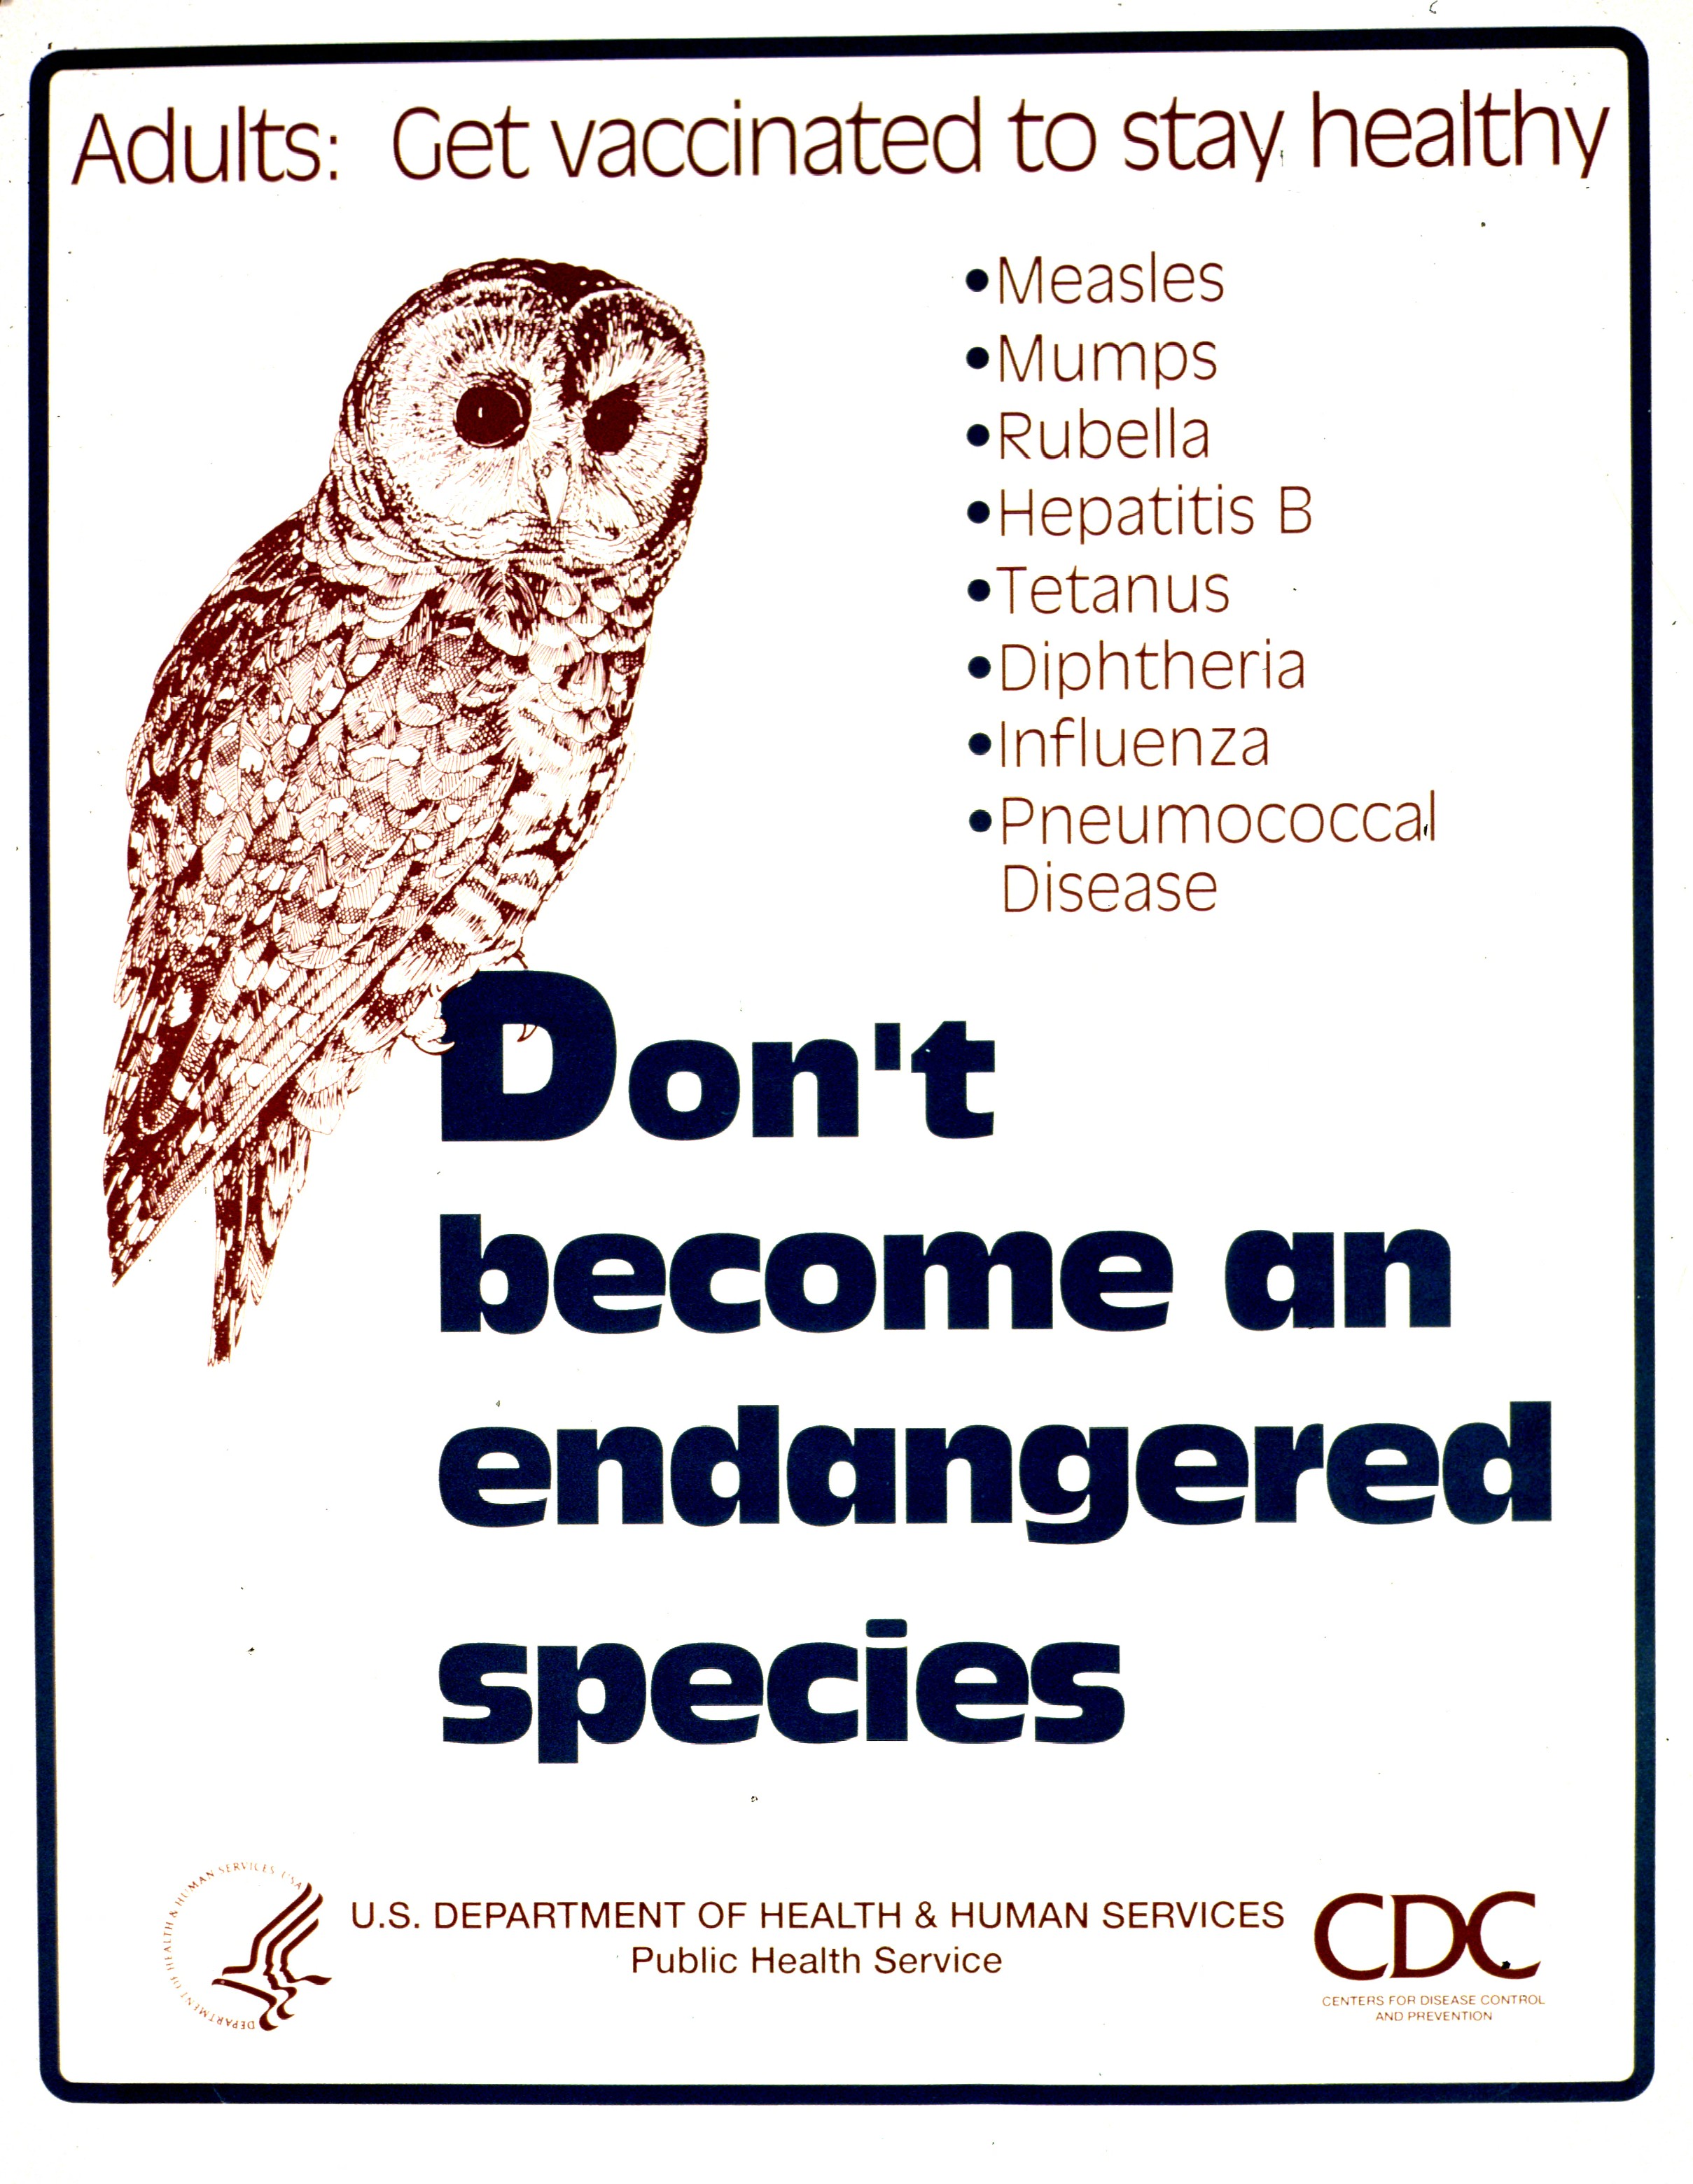 Don't become an endangered species